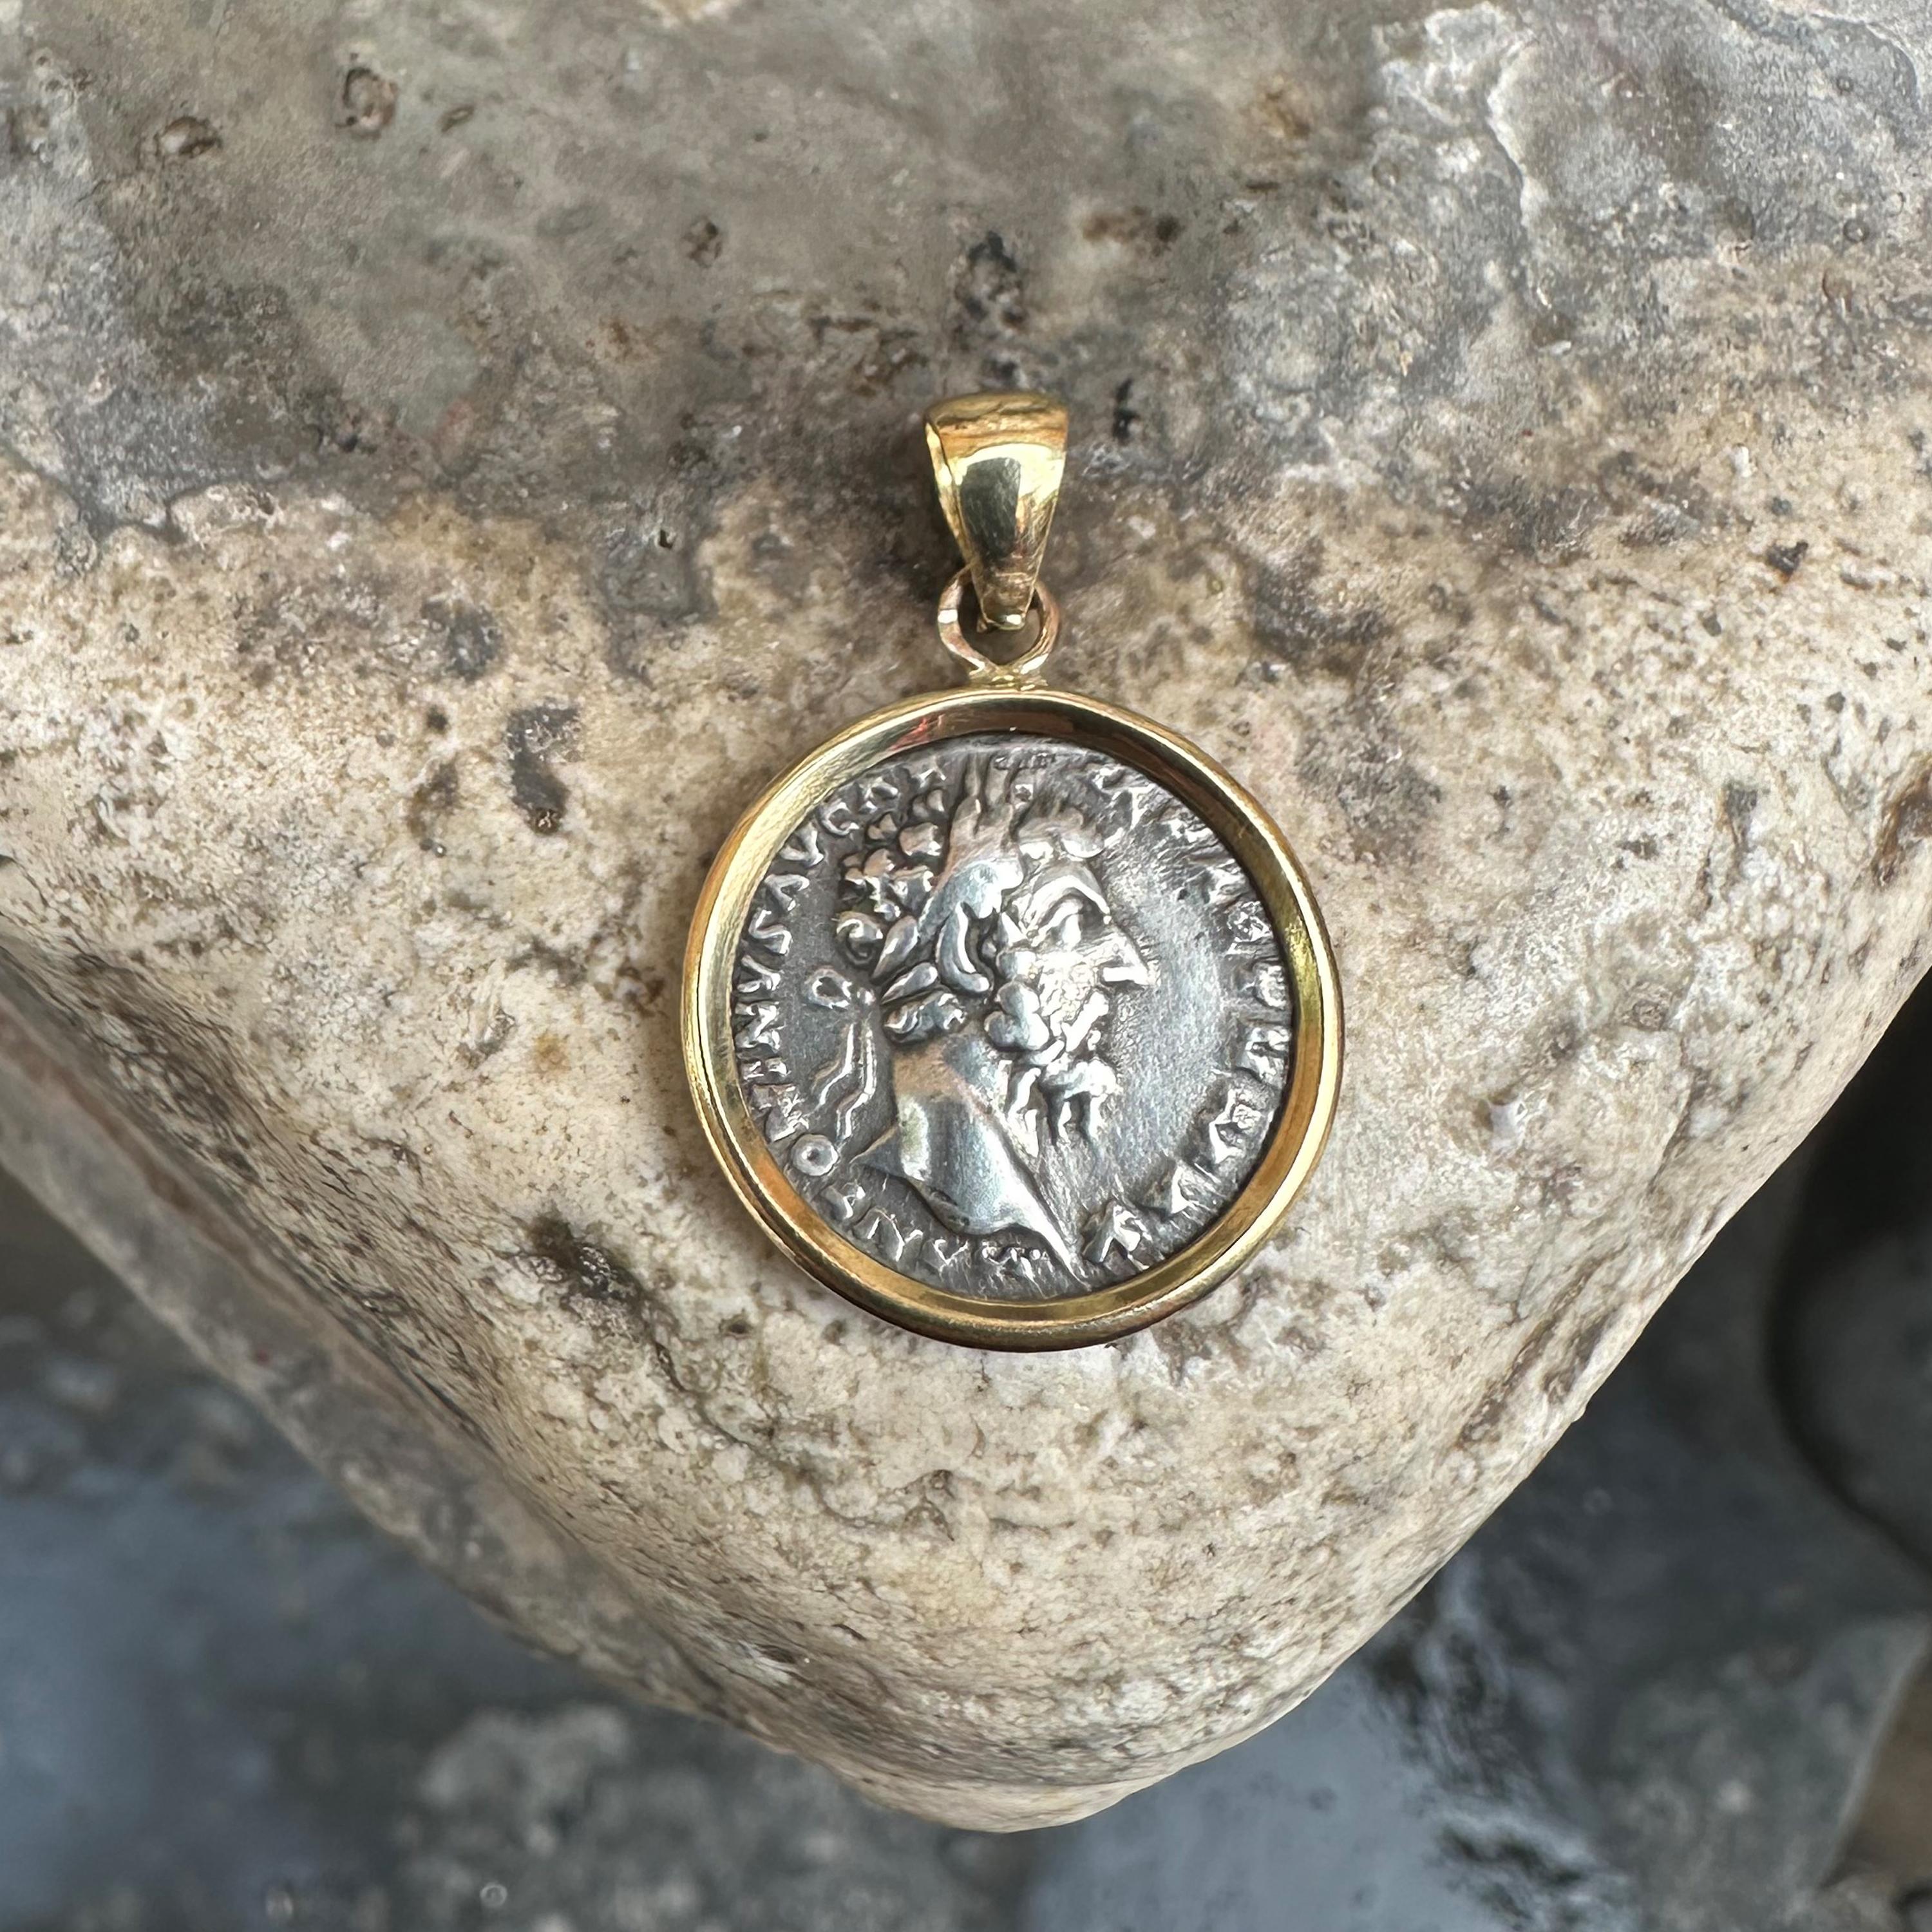 <p>This exquisite pendant features an original Roman coin dating back to the 2nd century AD, showcasing Emperor Marcus Aurelius. Crafted from 18 Kt gold, it is a testament to the timeless beauty and historical significance of ancient Roman art. The